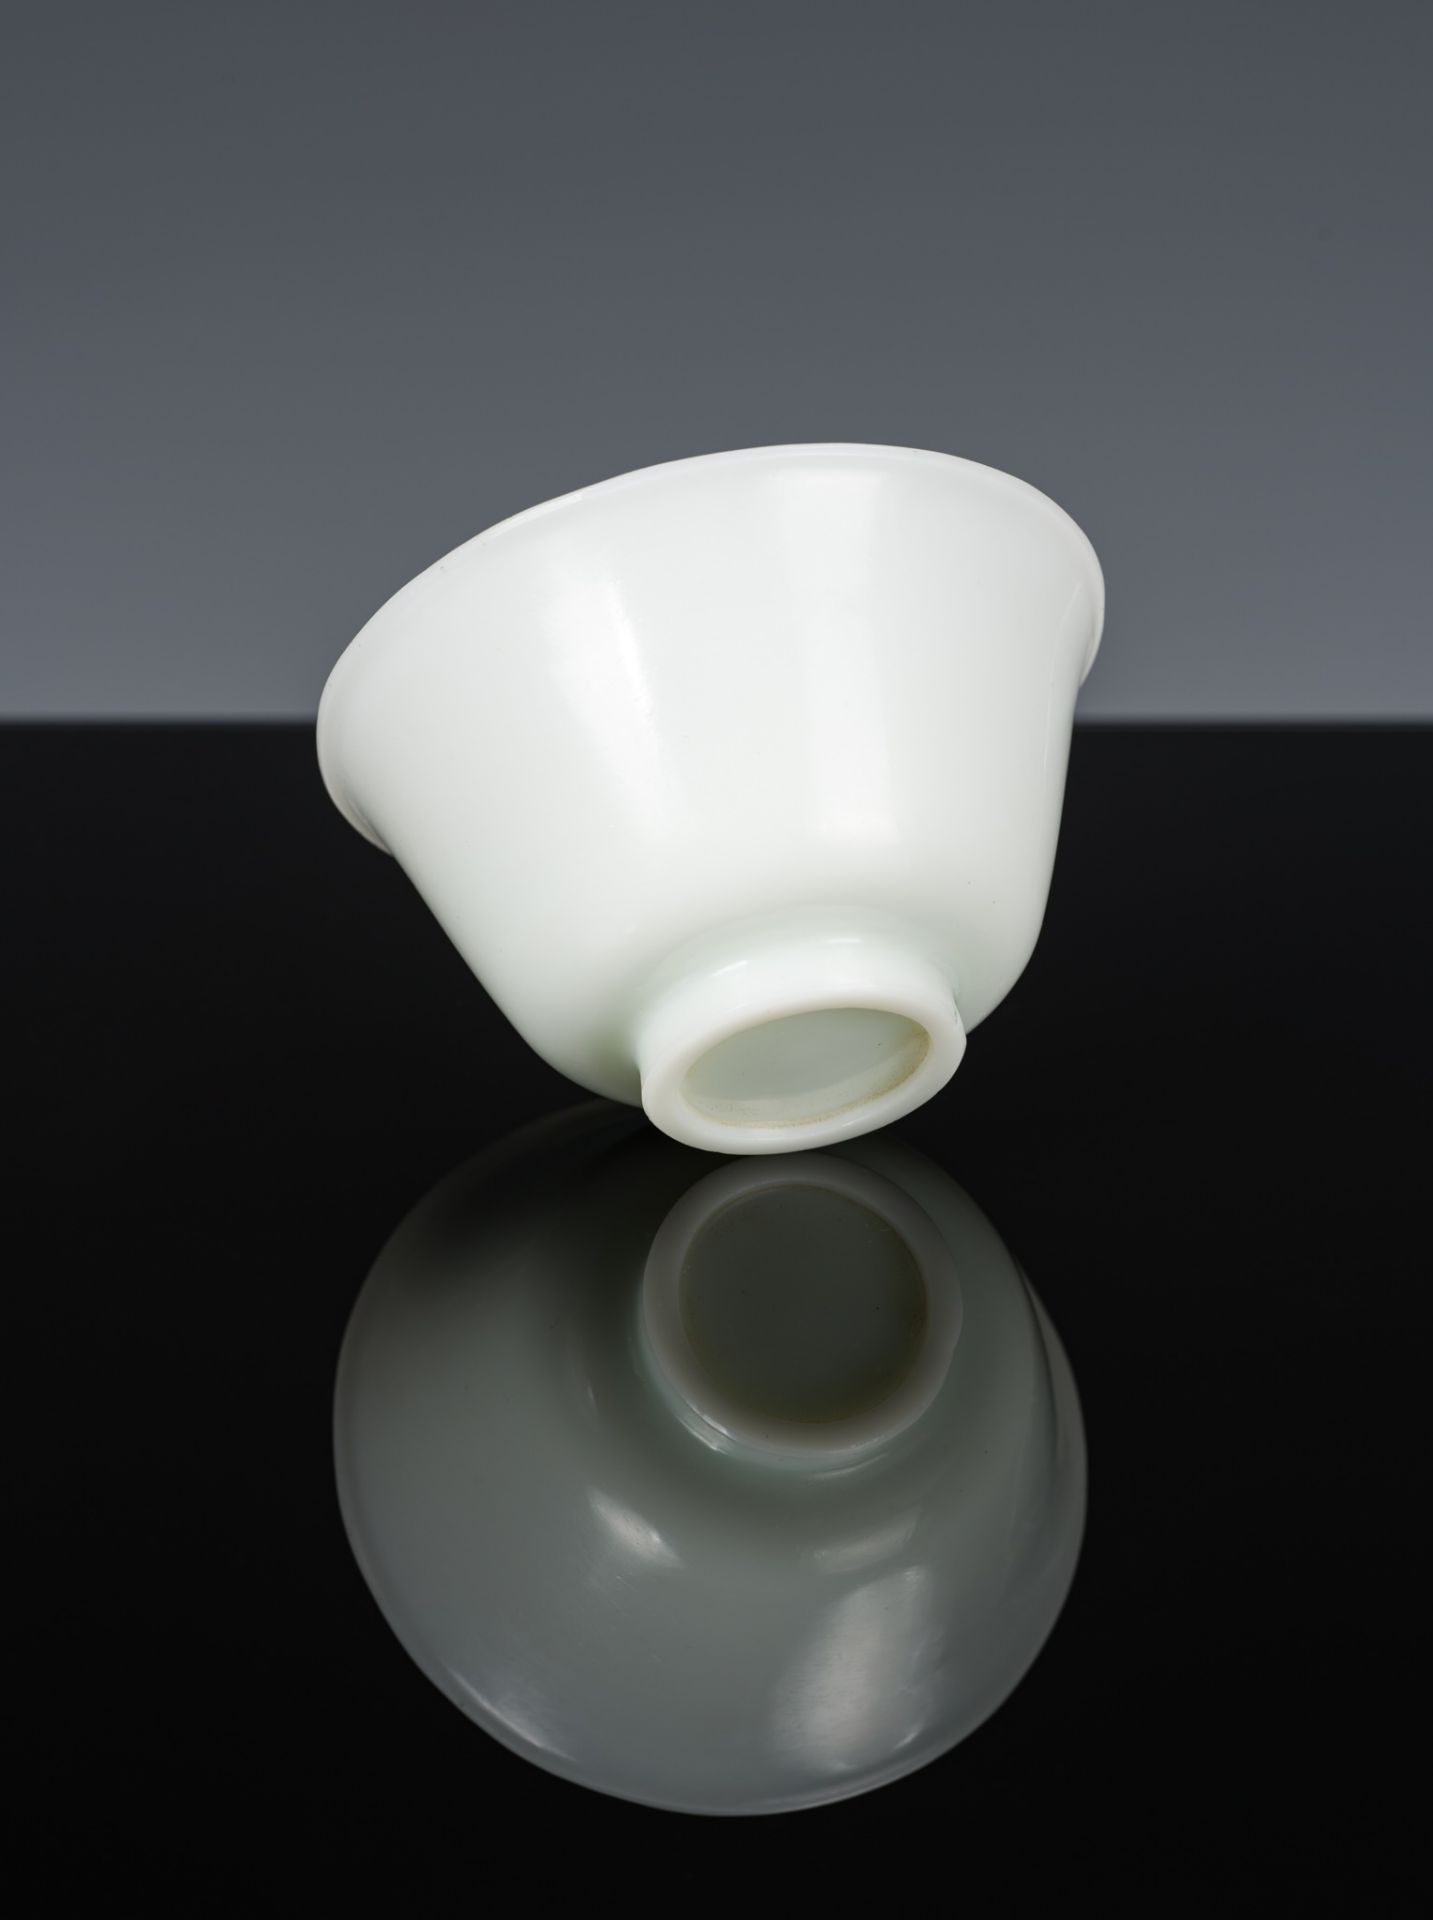 AN 'IMITATION JADE' WHITE GLASS BOWL, MID-QING DYNASTY - Image 3 of 9